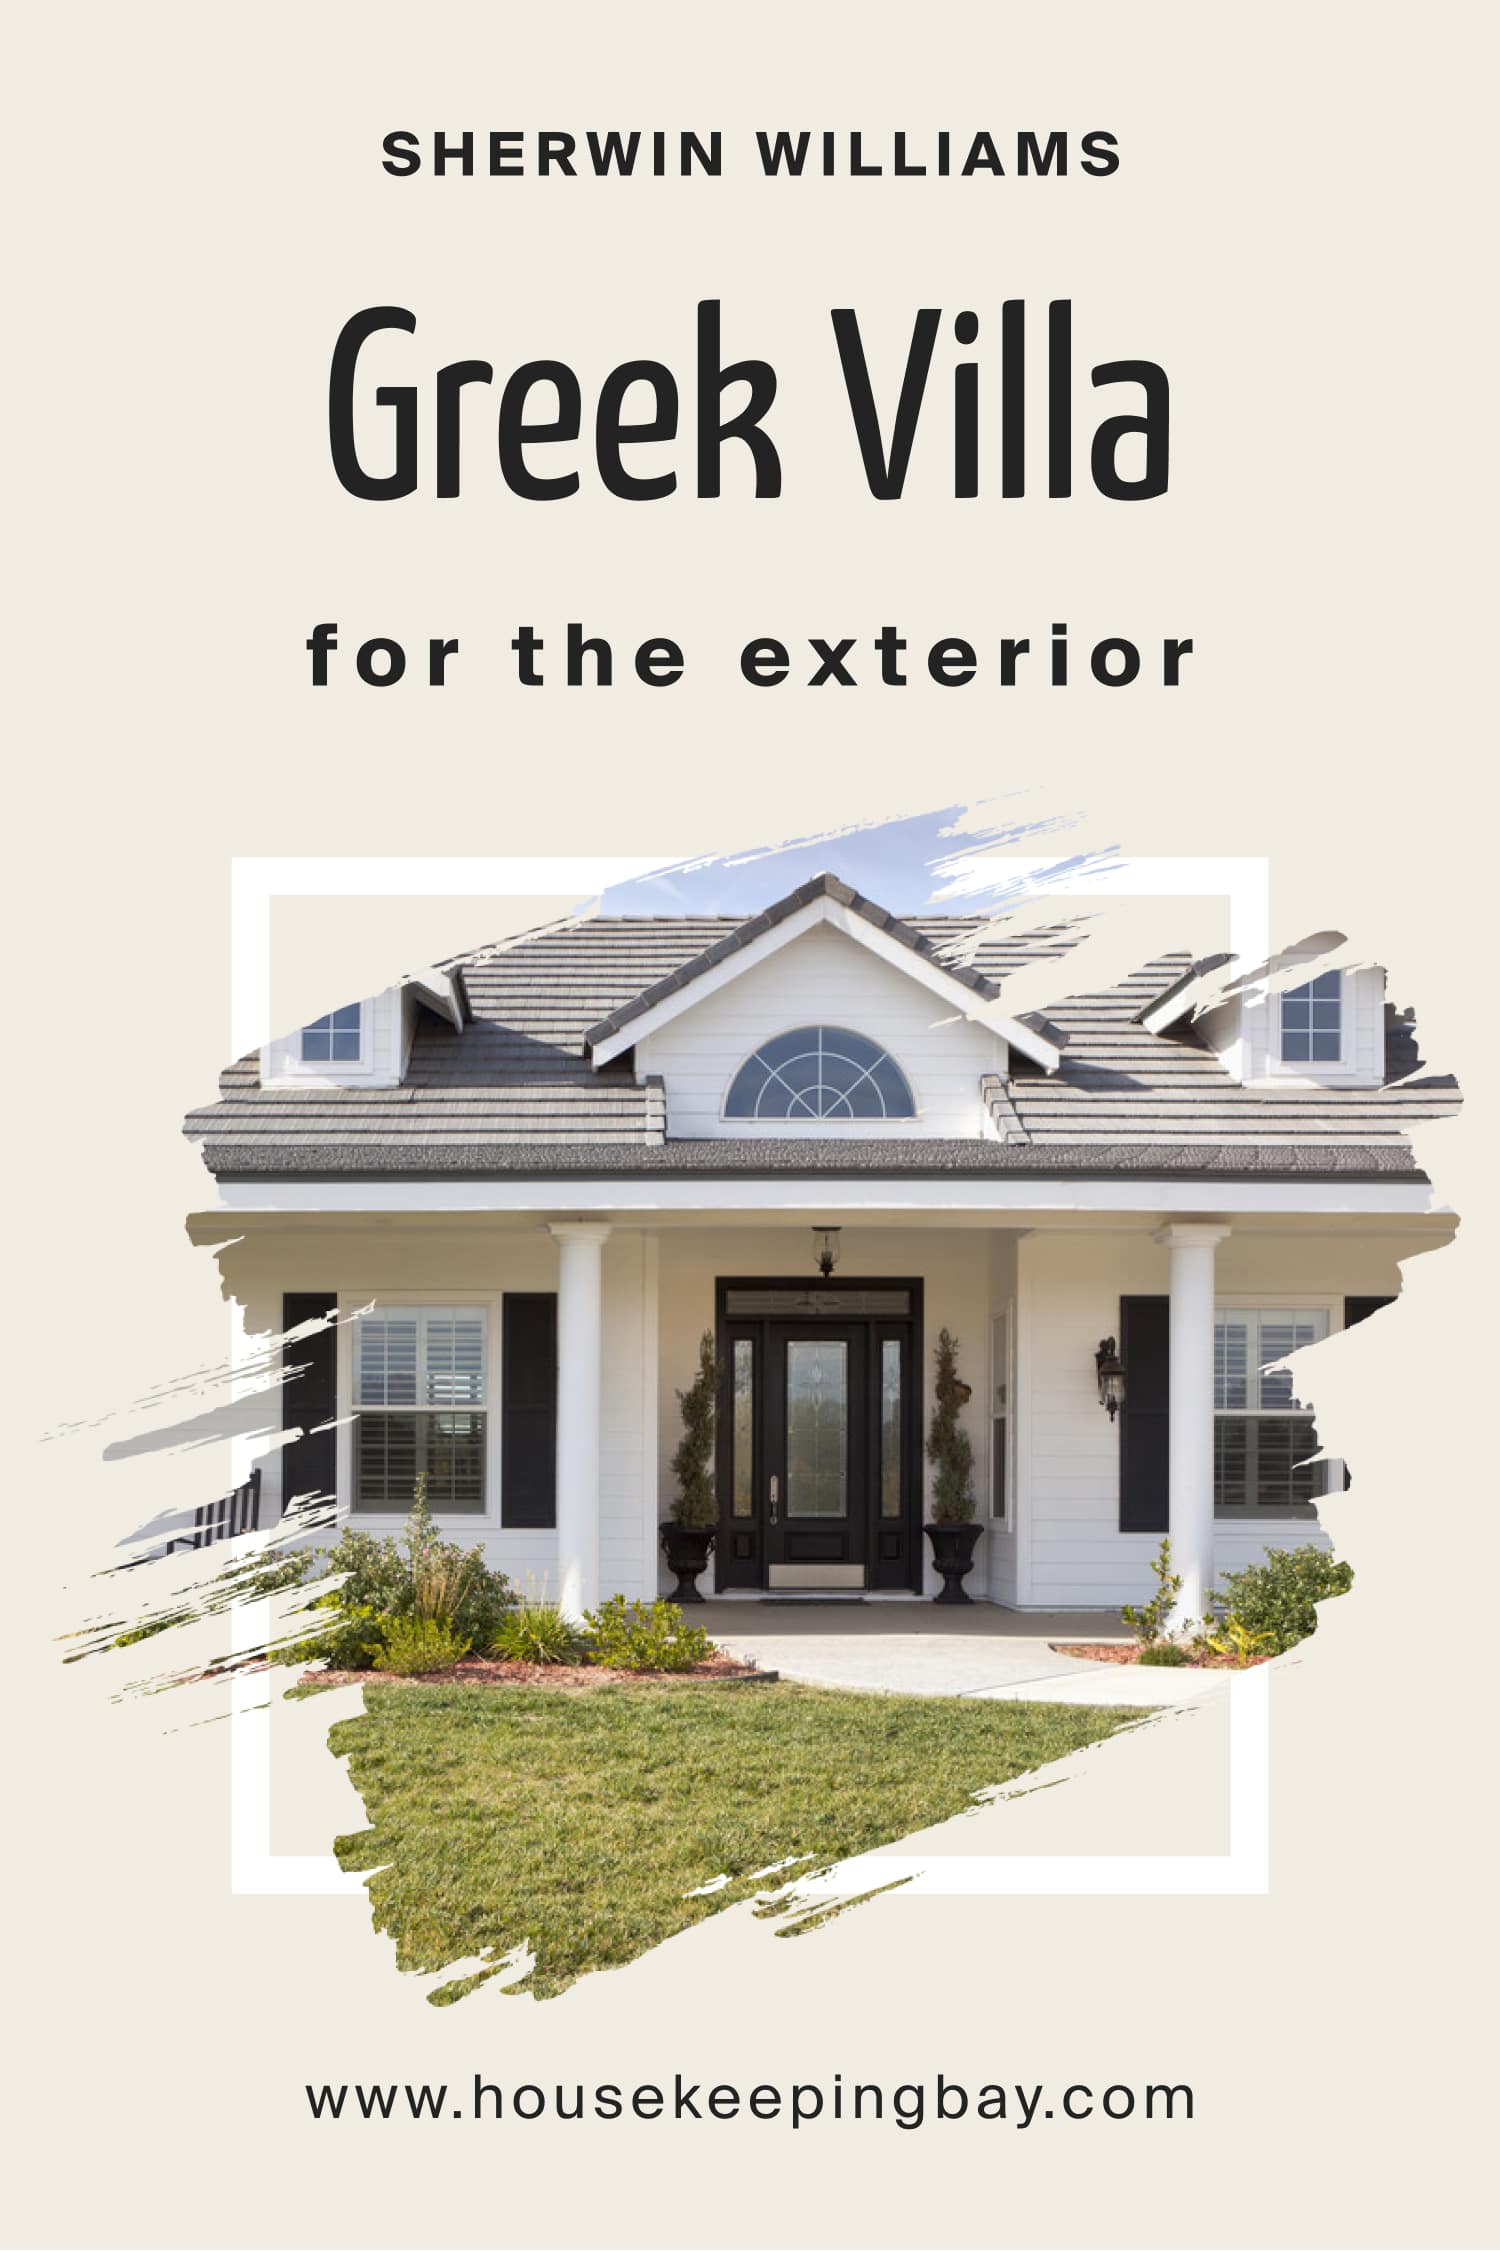 Sherwin Williams. Greek Villа For the exterior